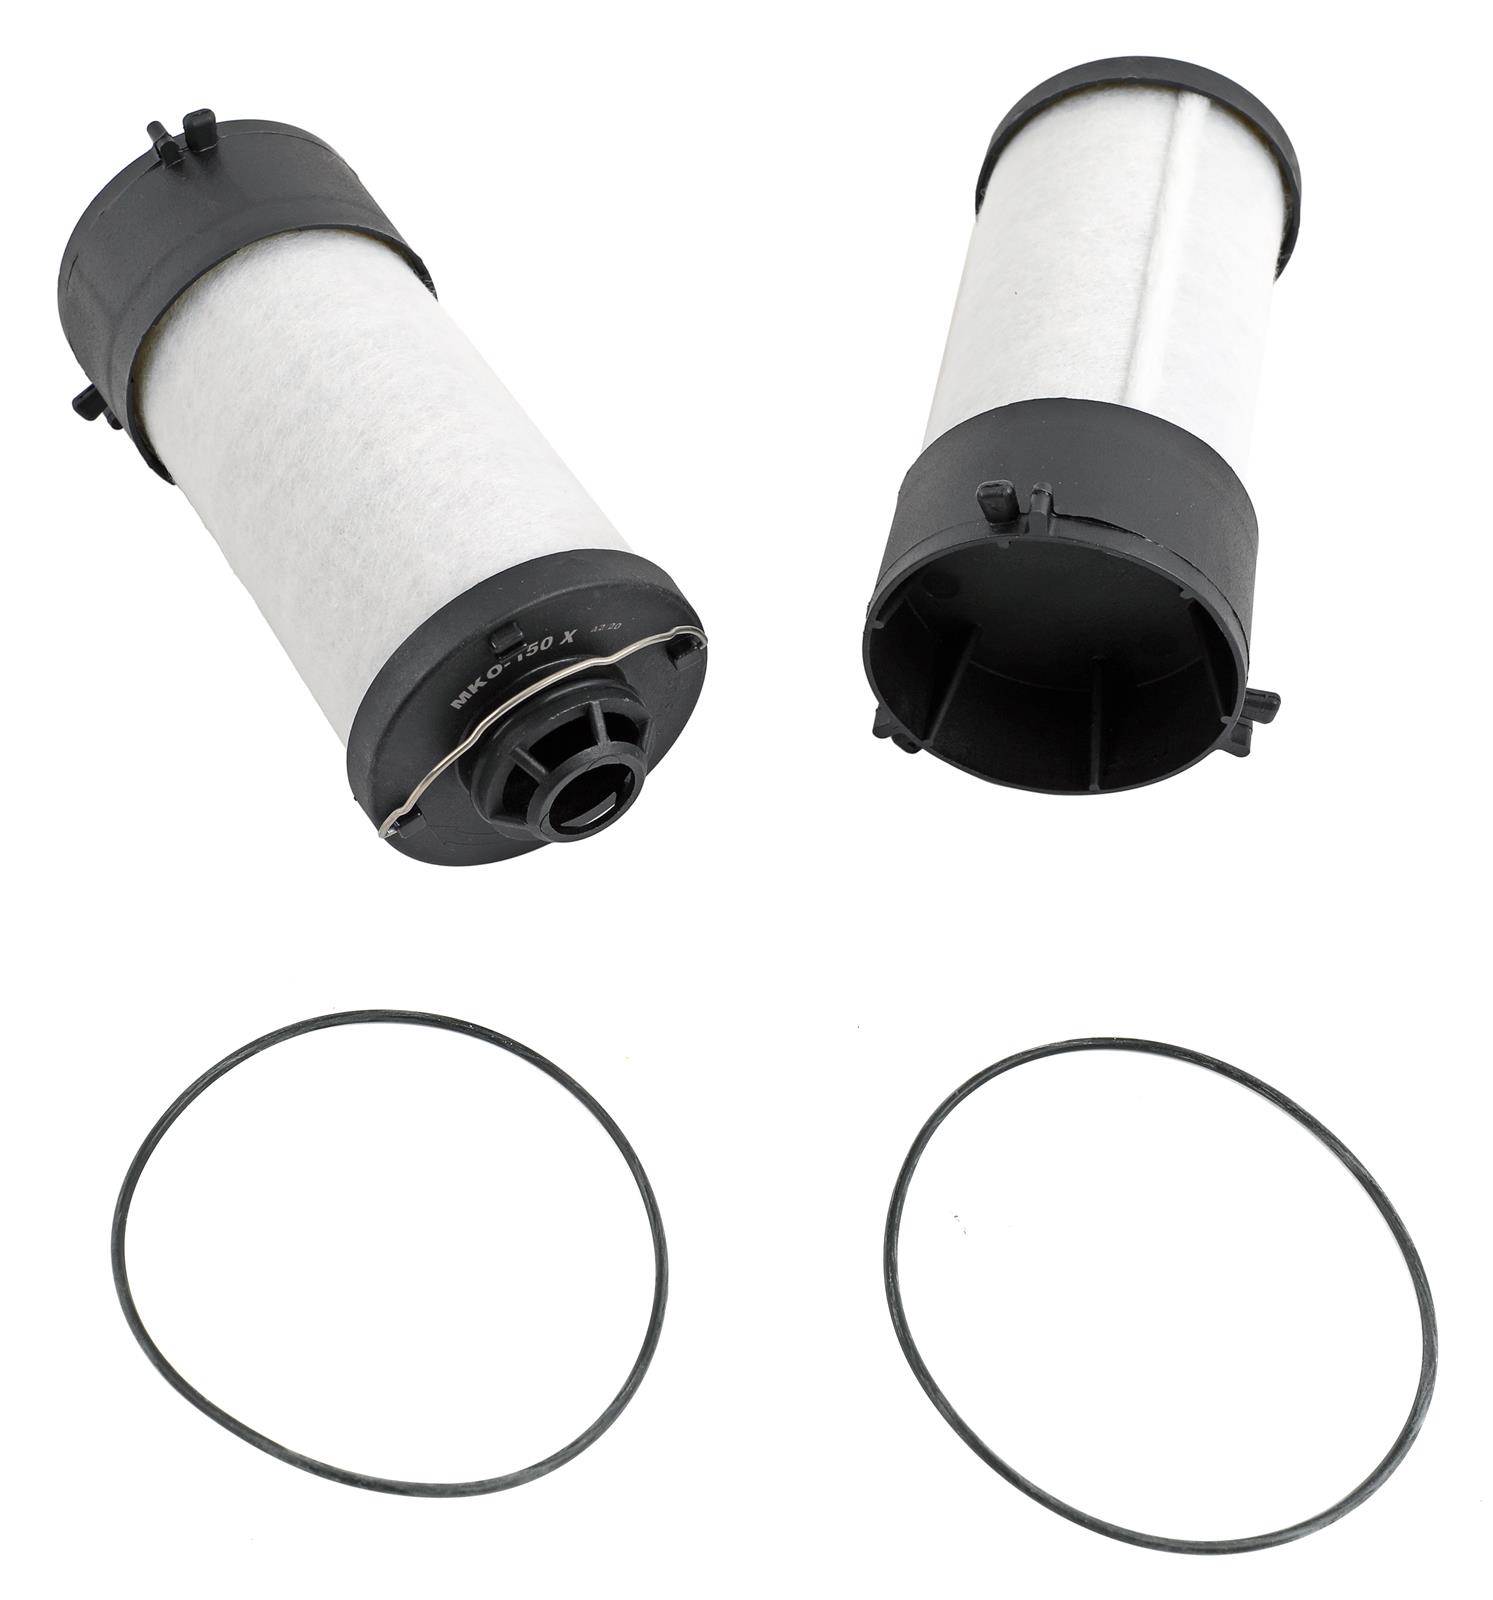 Exterior & Accessories - rod KEYWORD - Made In USA Filter Options - Free  Shipping on Orders Over $109 at Summit Racing